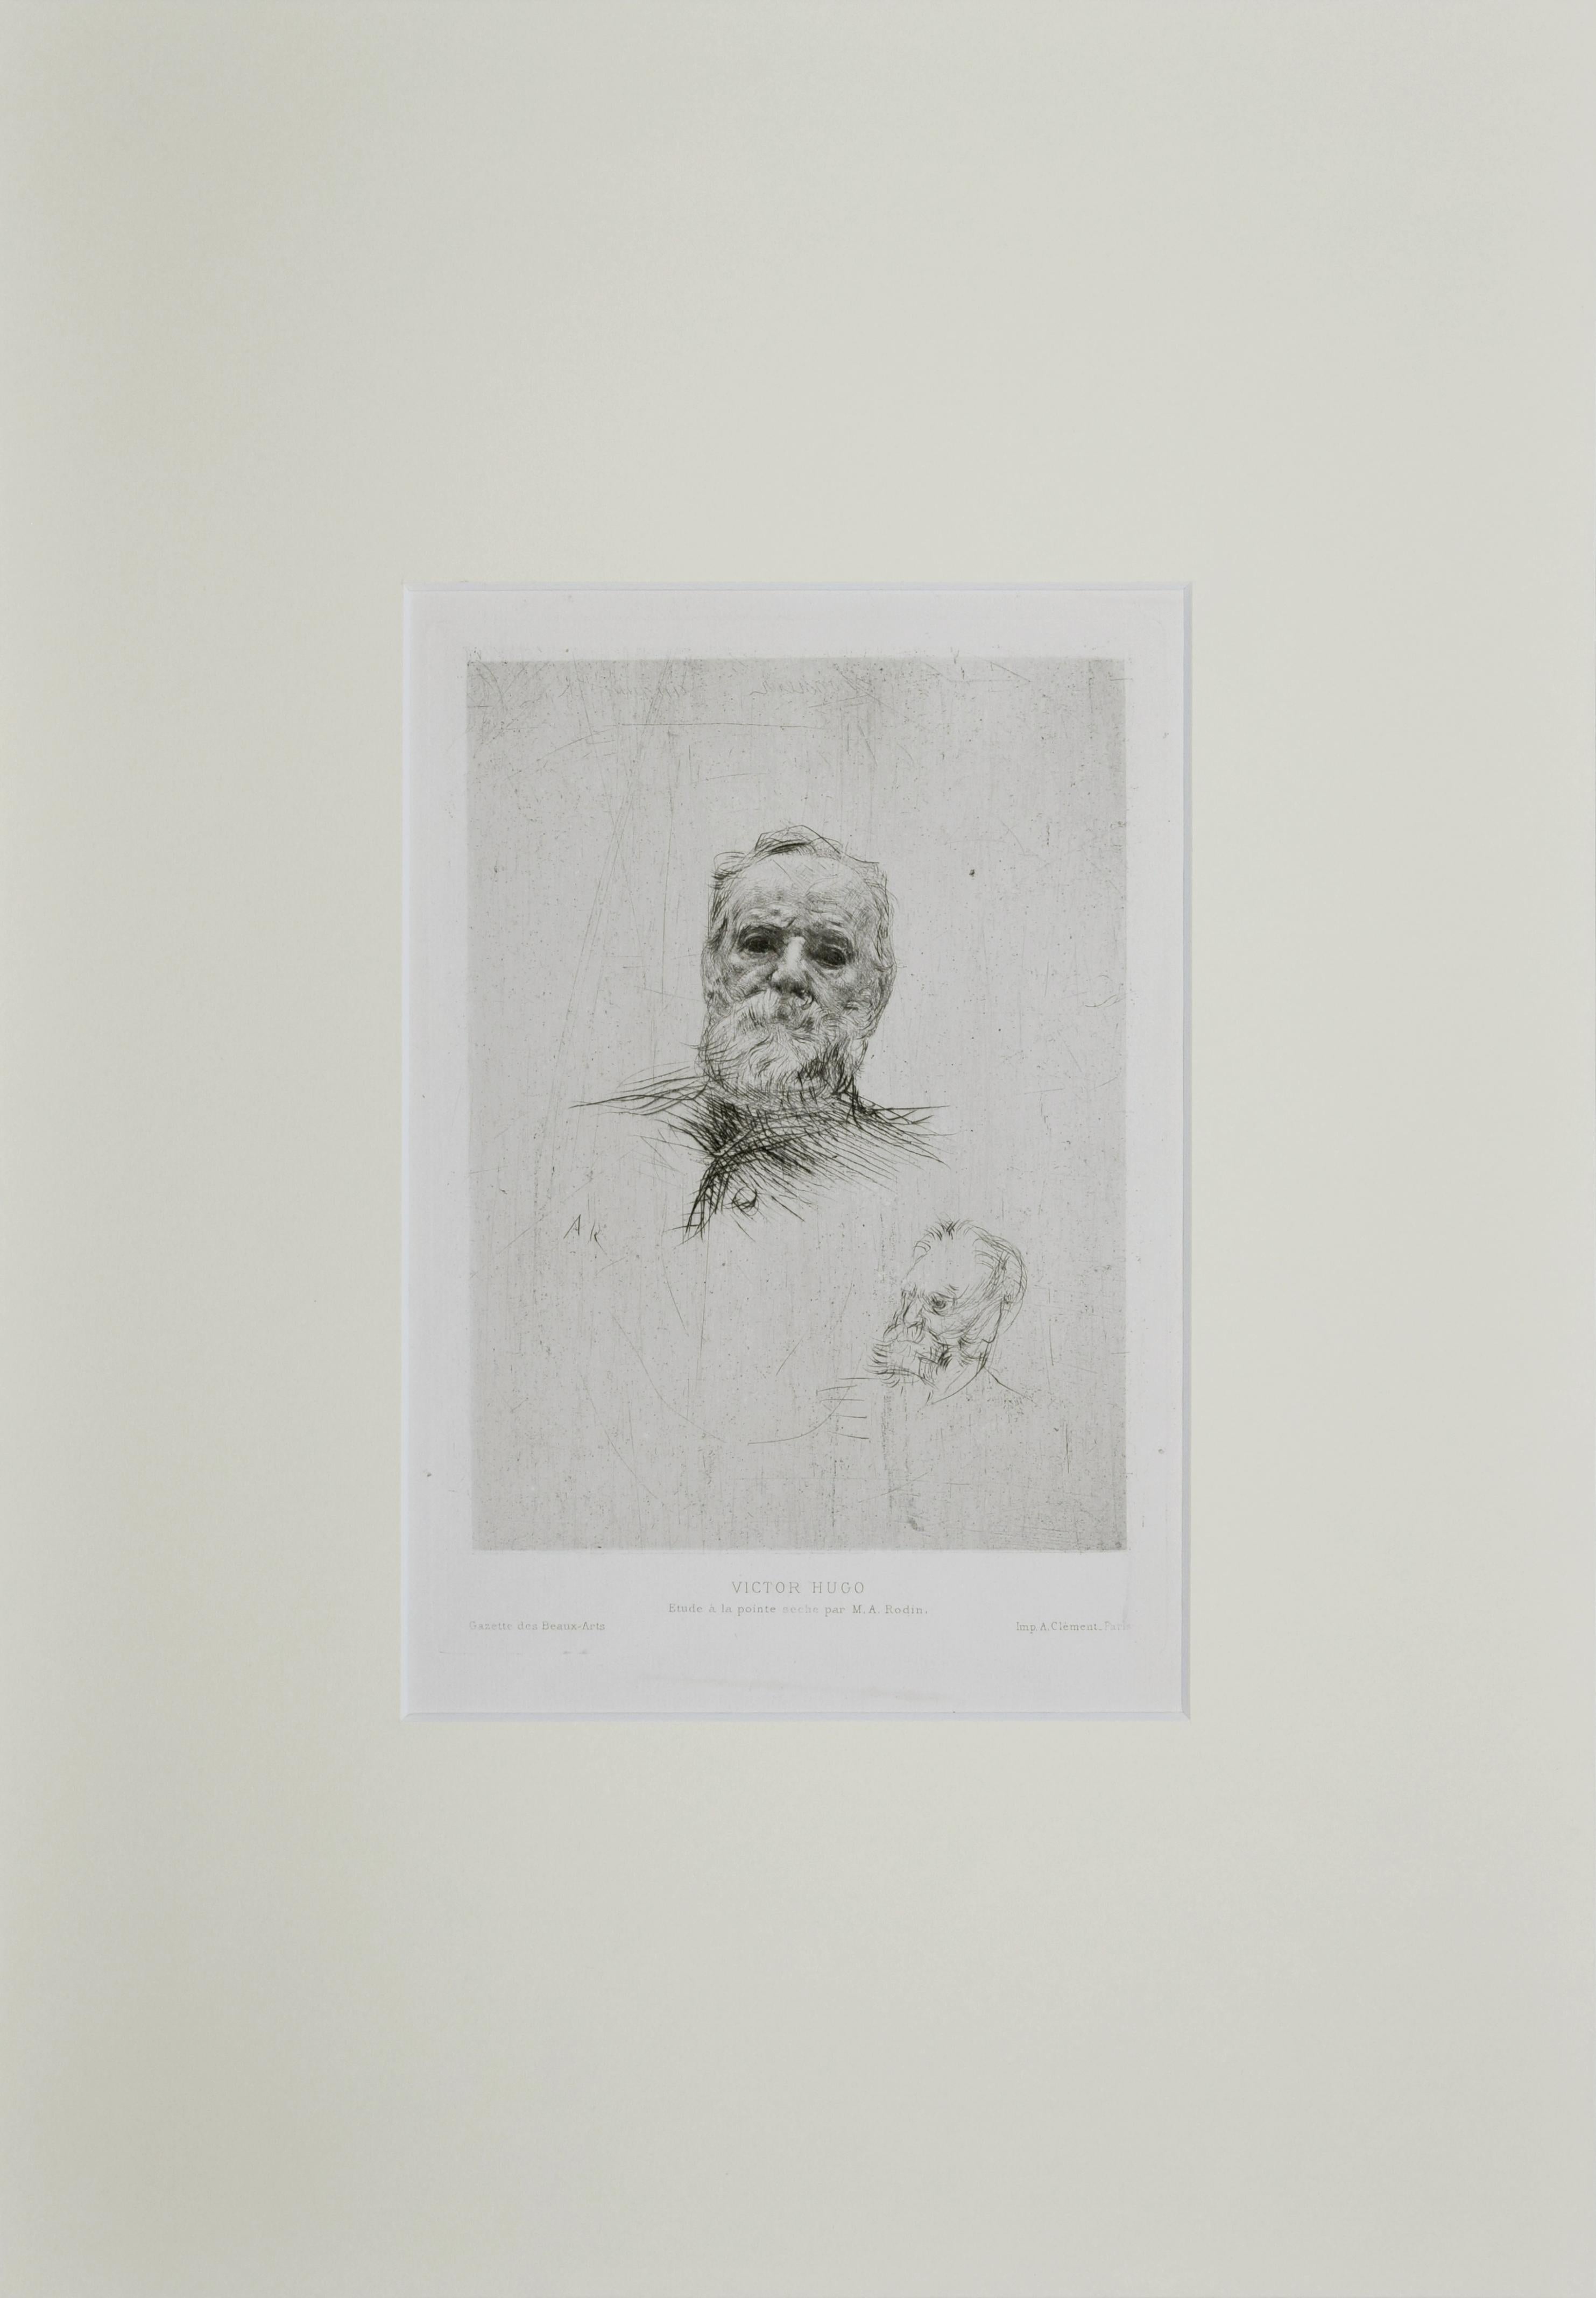 Victor Hugo - Original Etching by A. Rodin - 1889 - Print by Auguste Rodin